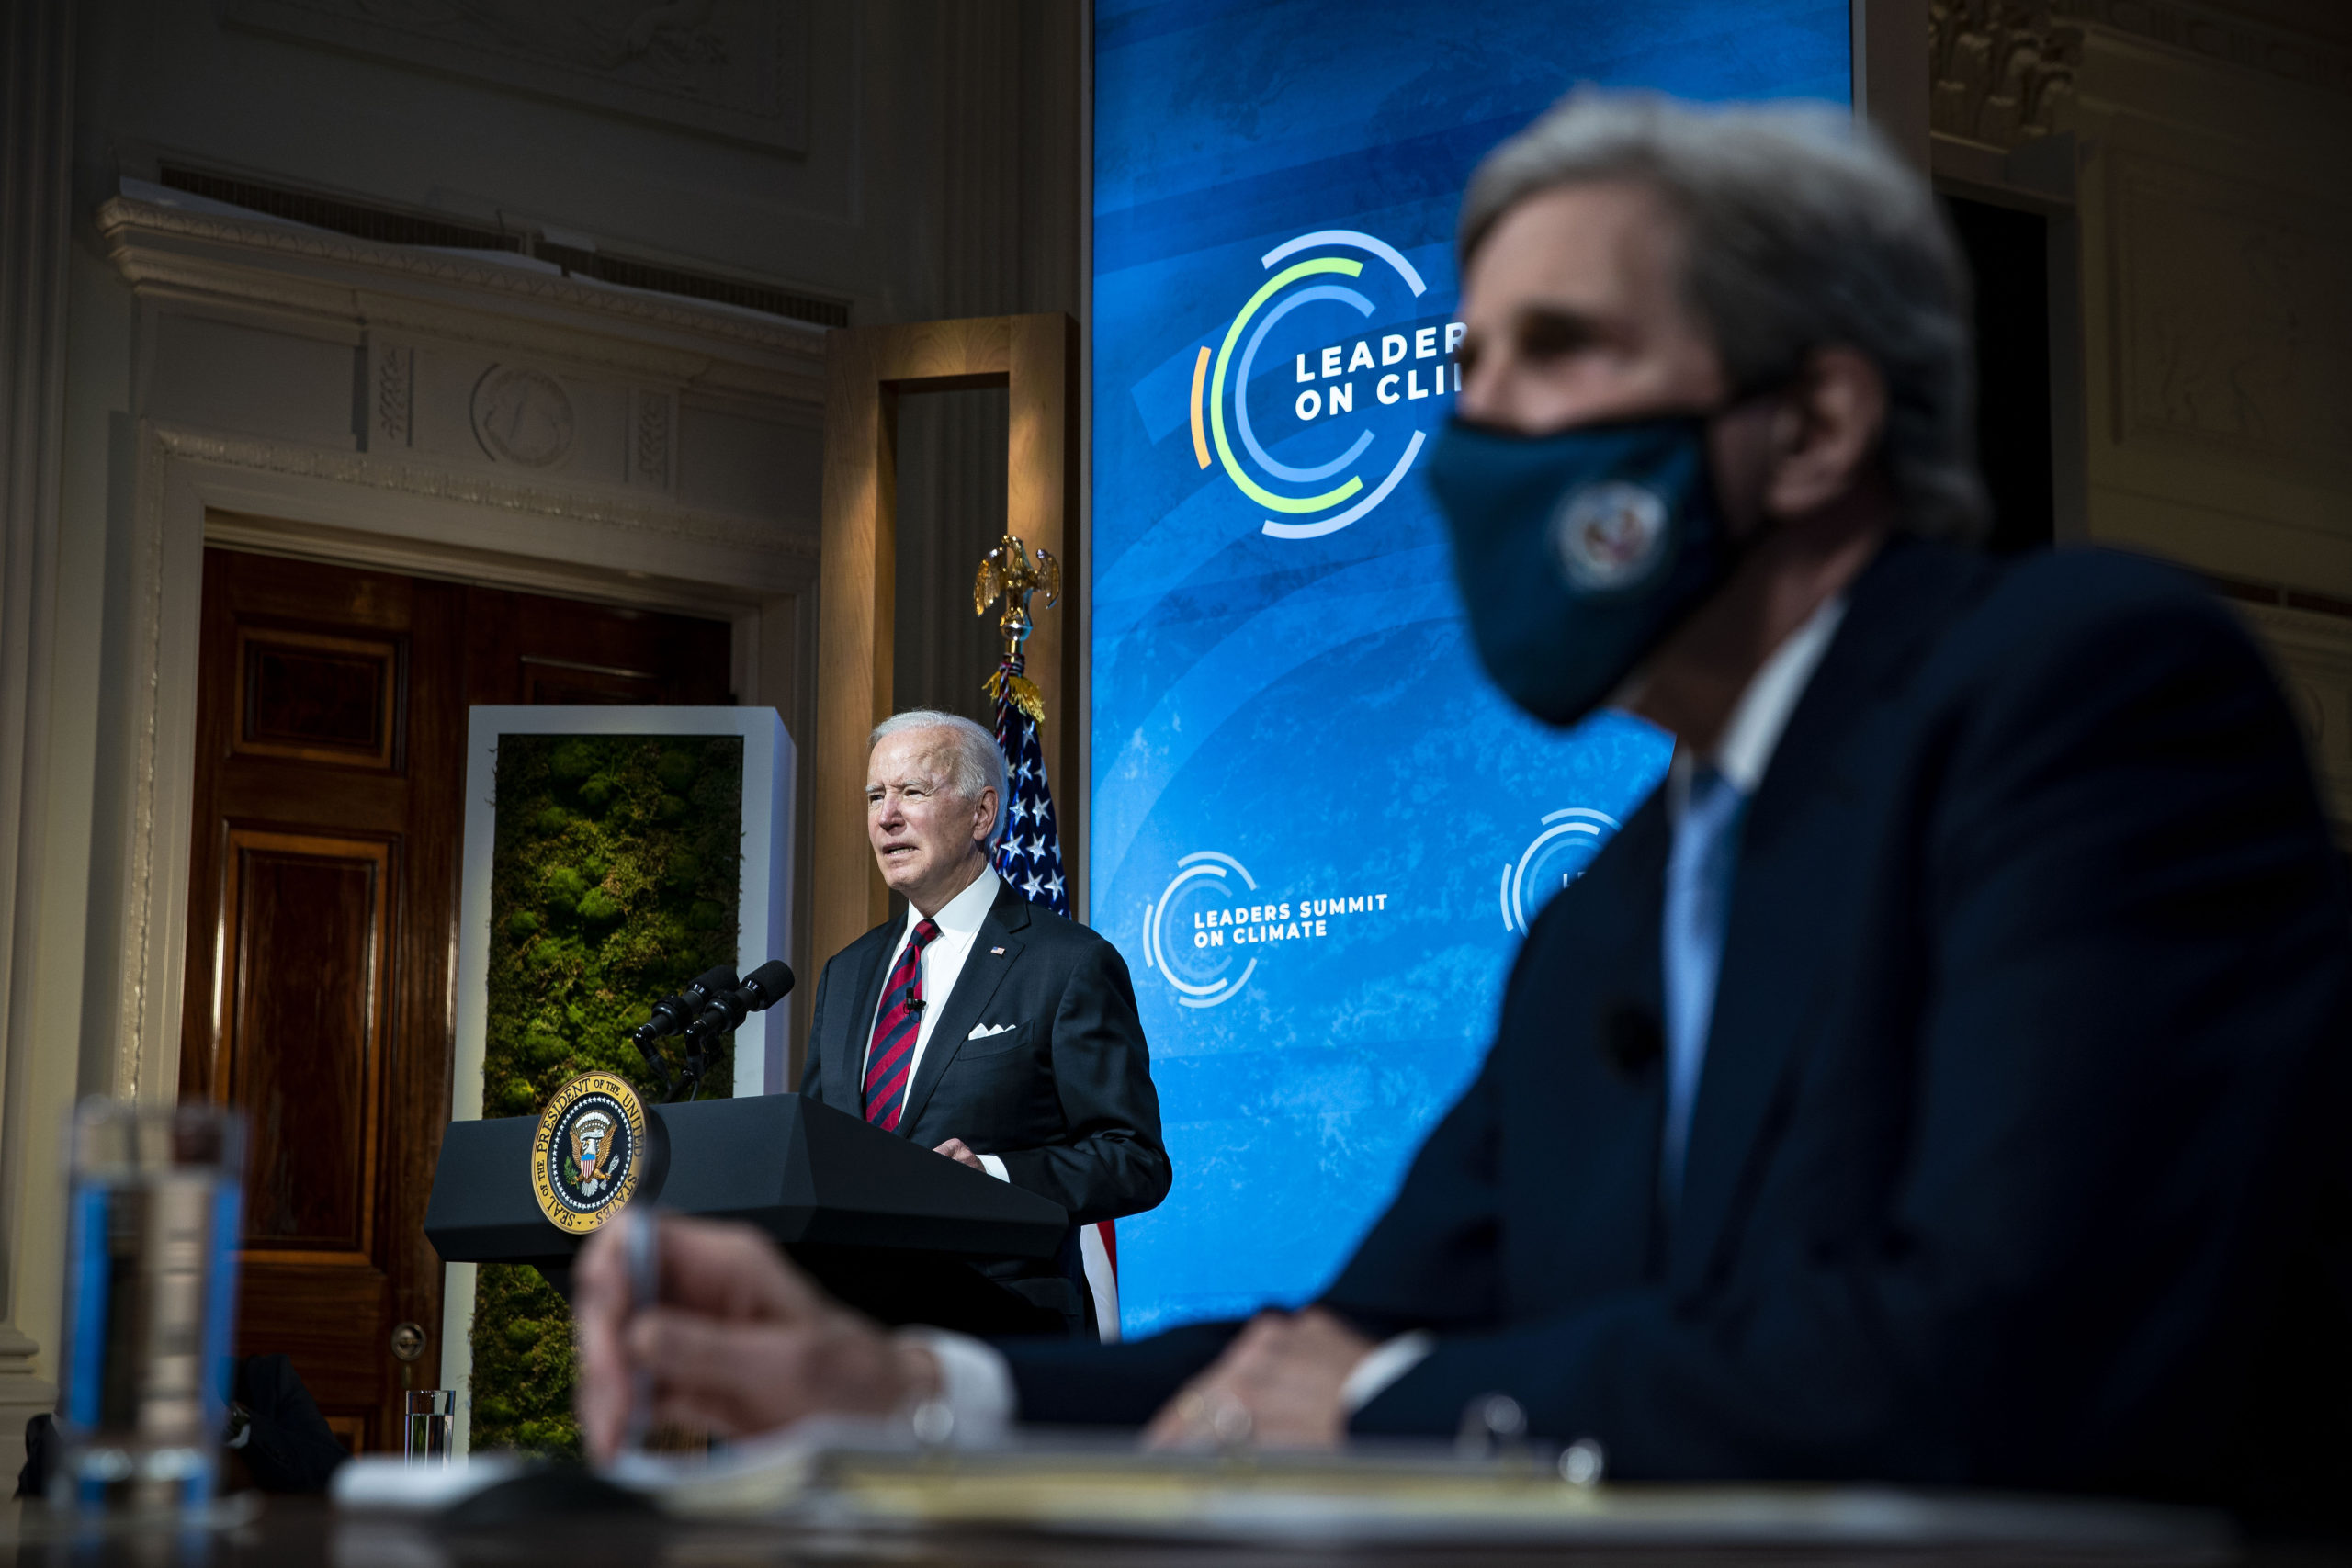 President Joe Biden delivers remarks as Special Presidential Envoy for Climate and former Secretary of State John Kerry listens during a virtual Leaders Summit on Climate in April. (Al Drago/Pool/Getty Images)